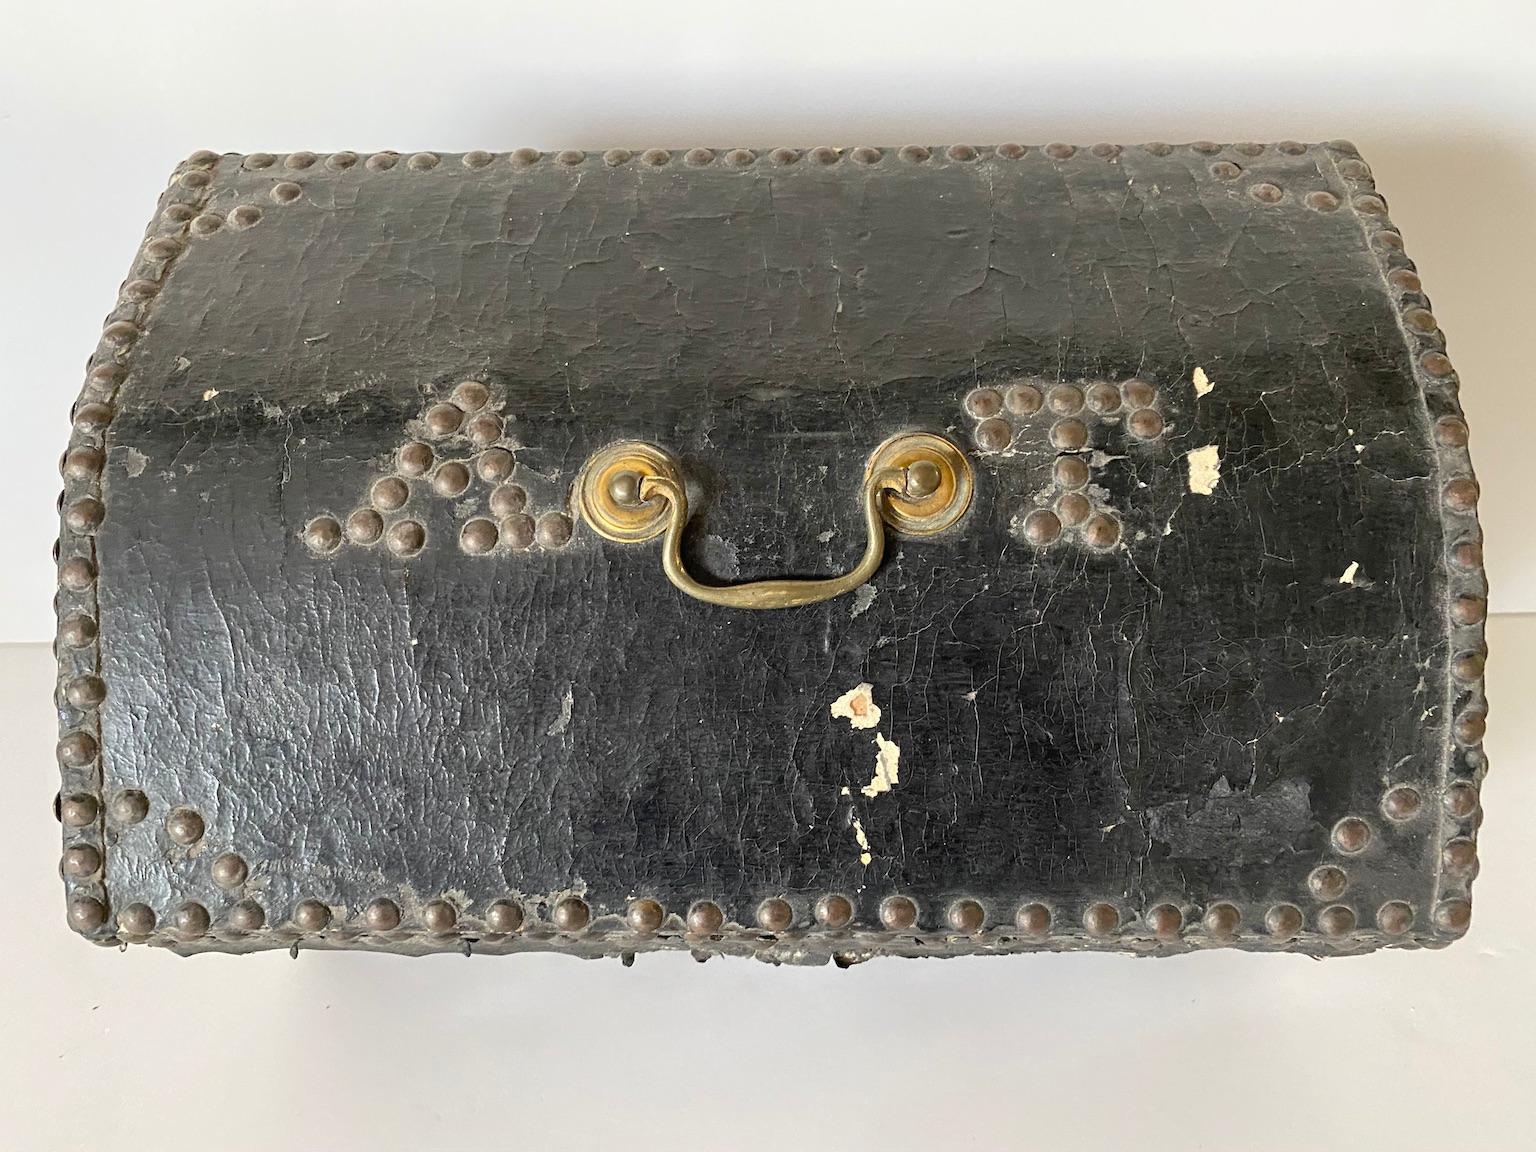 This small box for personal possessions (perhaps papers or letters), is covered in black leather and decorated with borders of brass tacks, including the letters A.T. on its lid, and two diamond shapes and a heart shape on the front side face. The